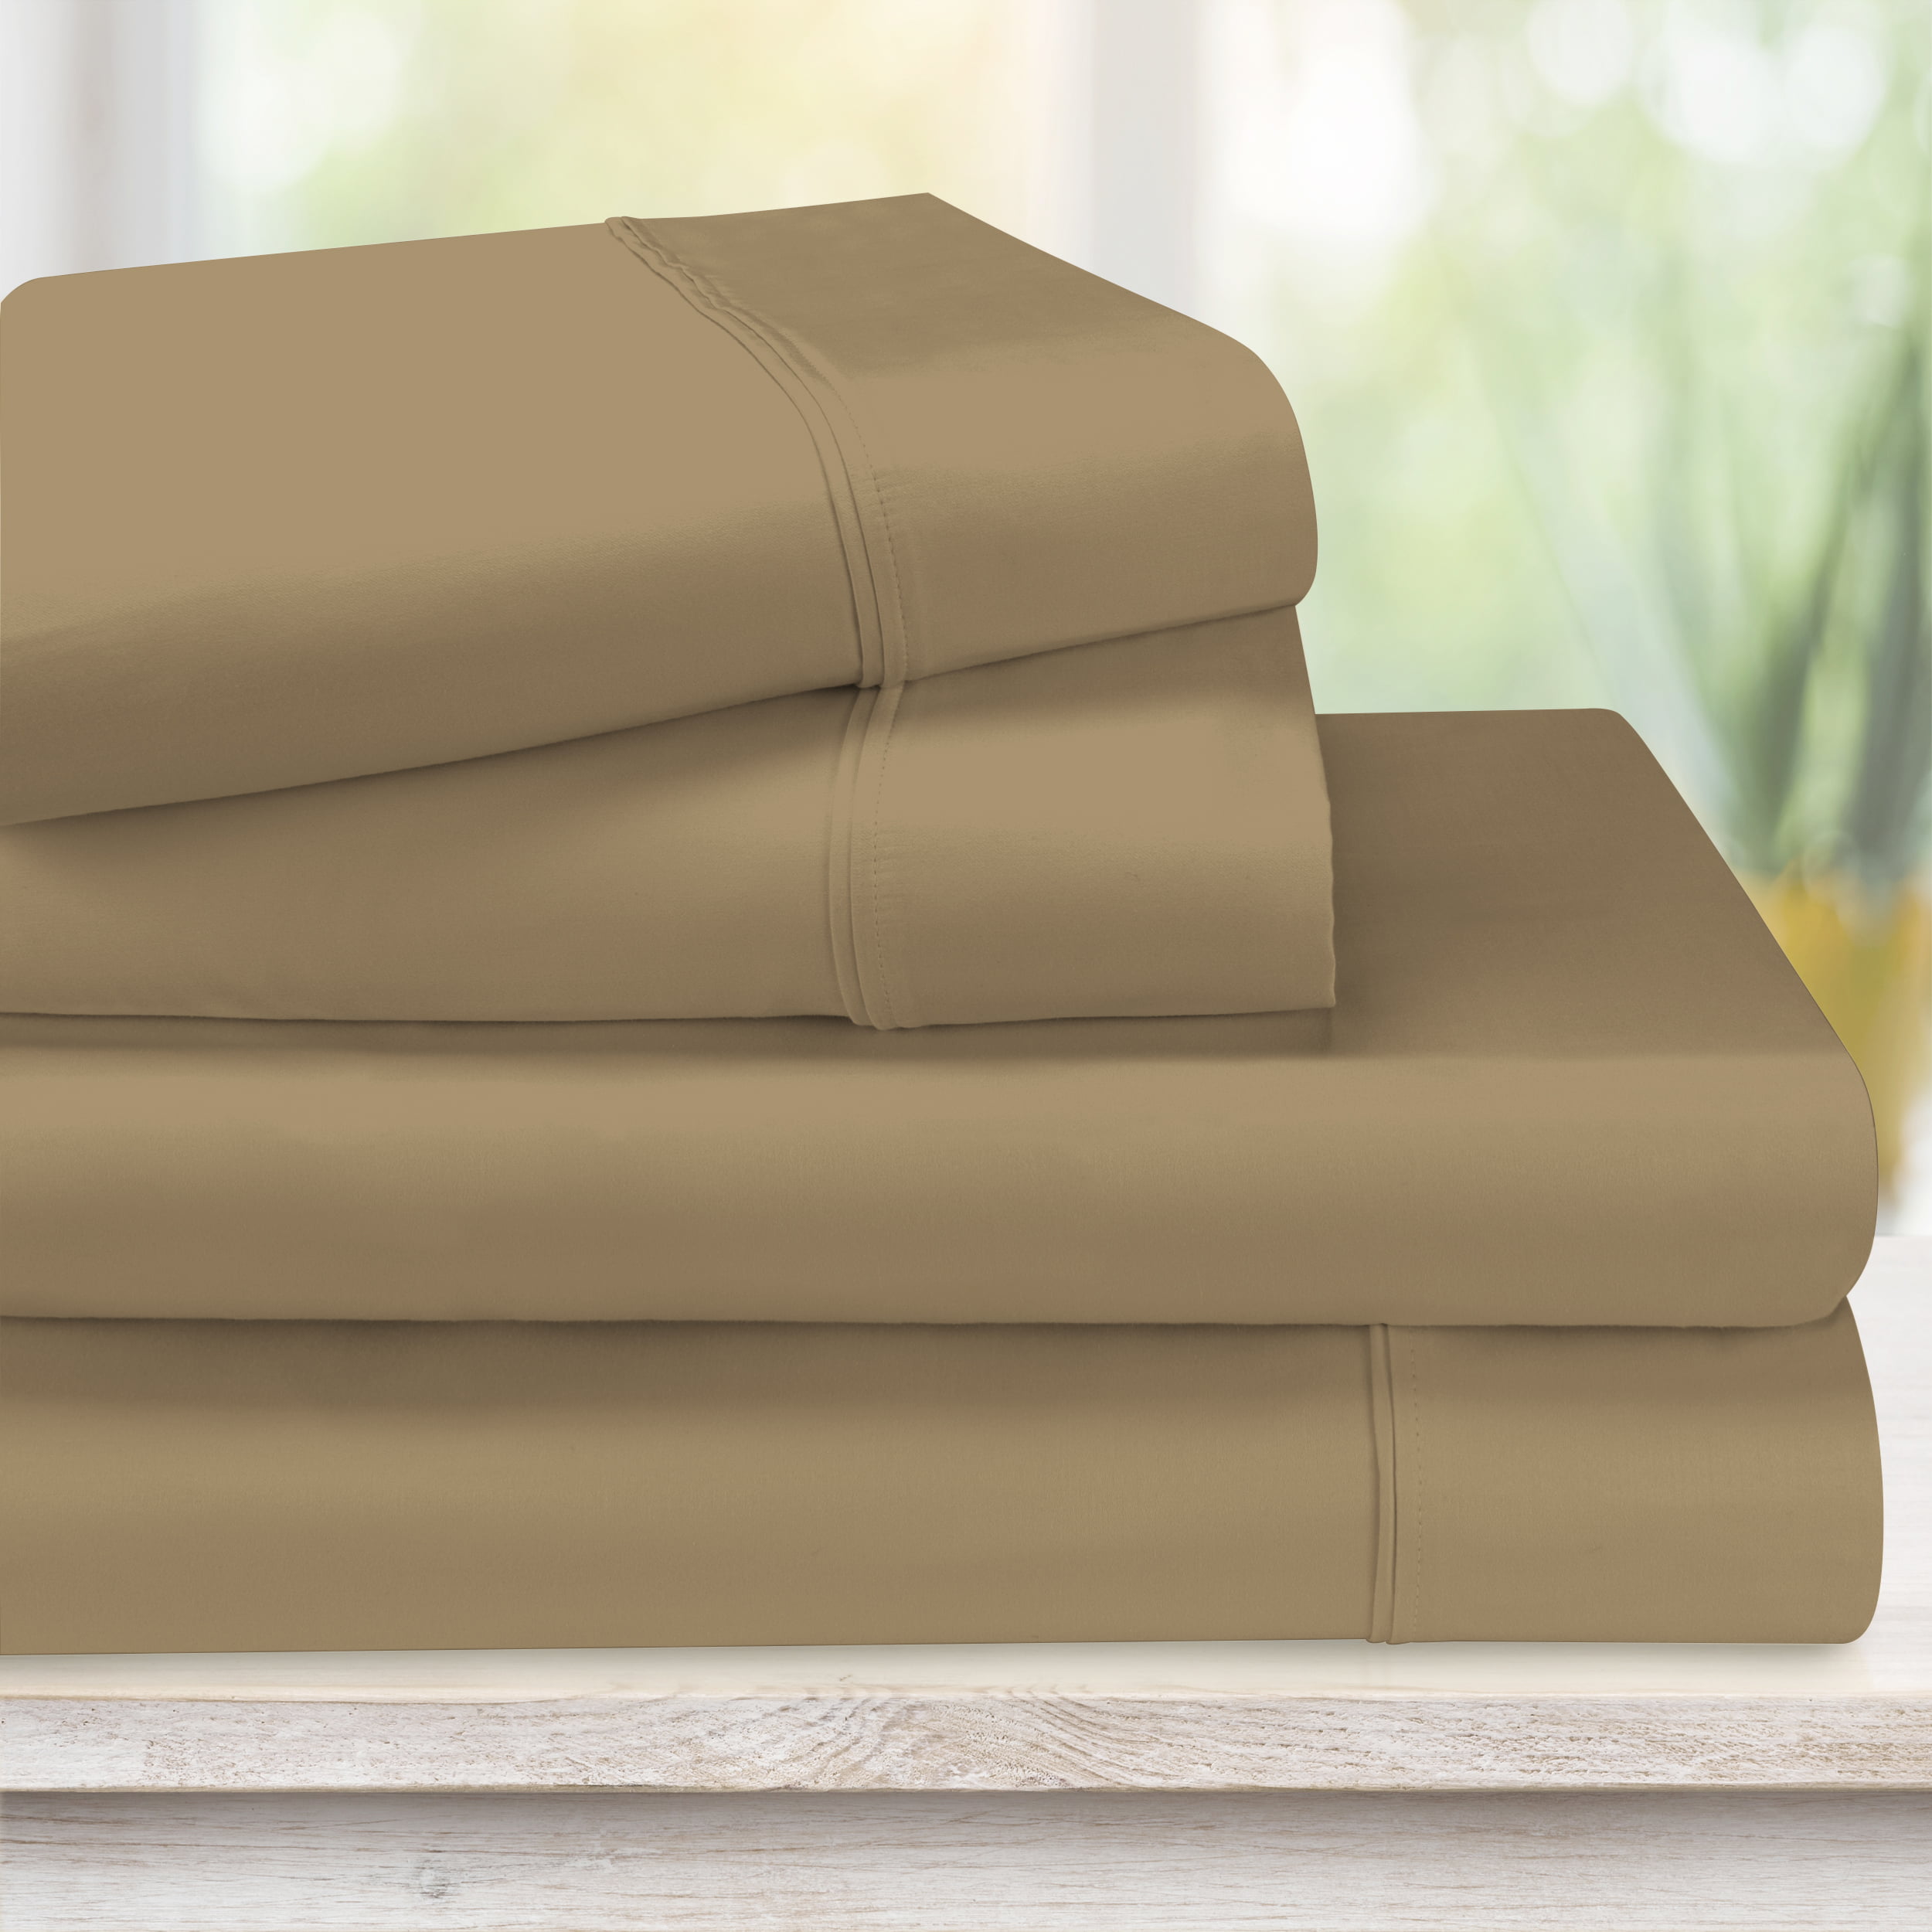 Details about   Awesome 1 PC Fitted Sheet 1200 TC Egyptian Cotton Multi Colors Queen Size